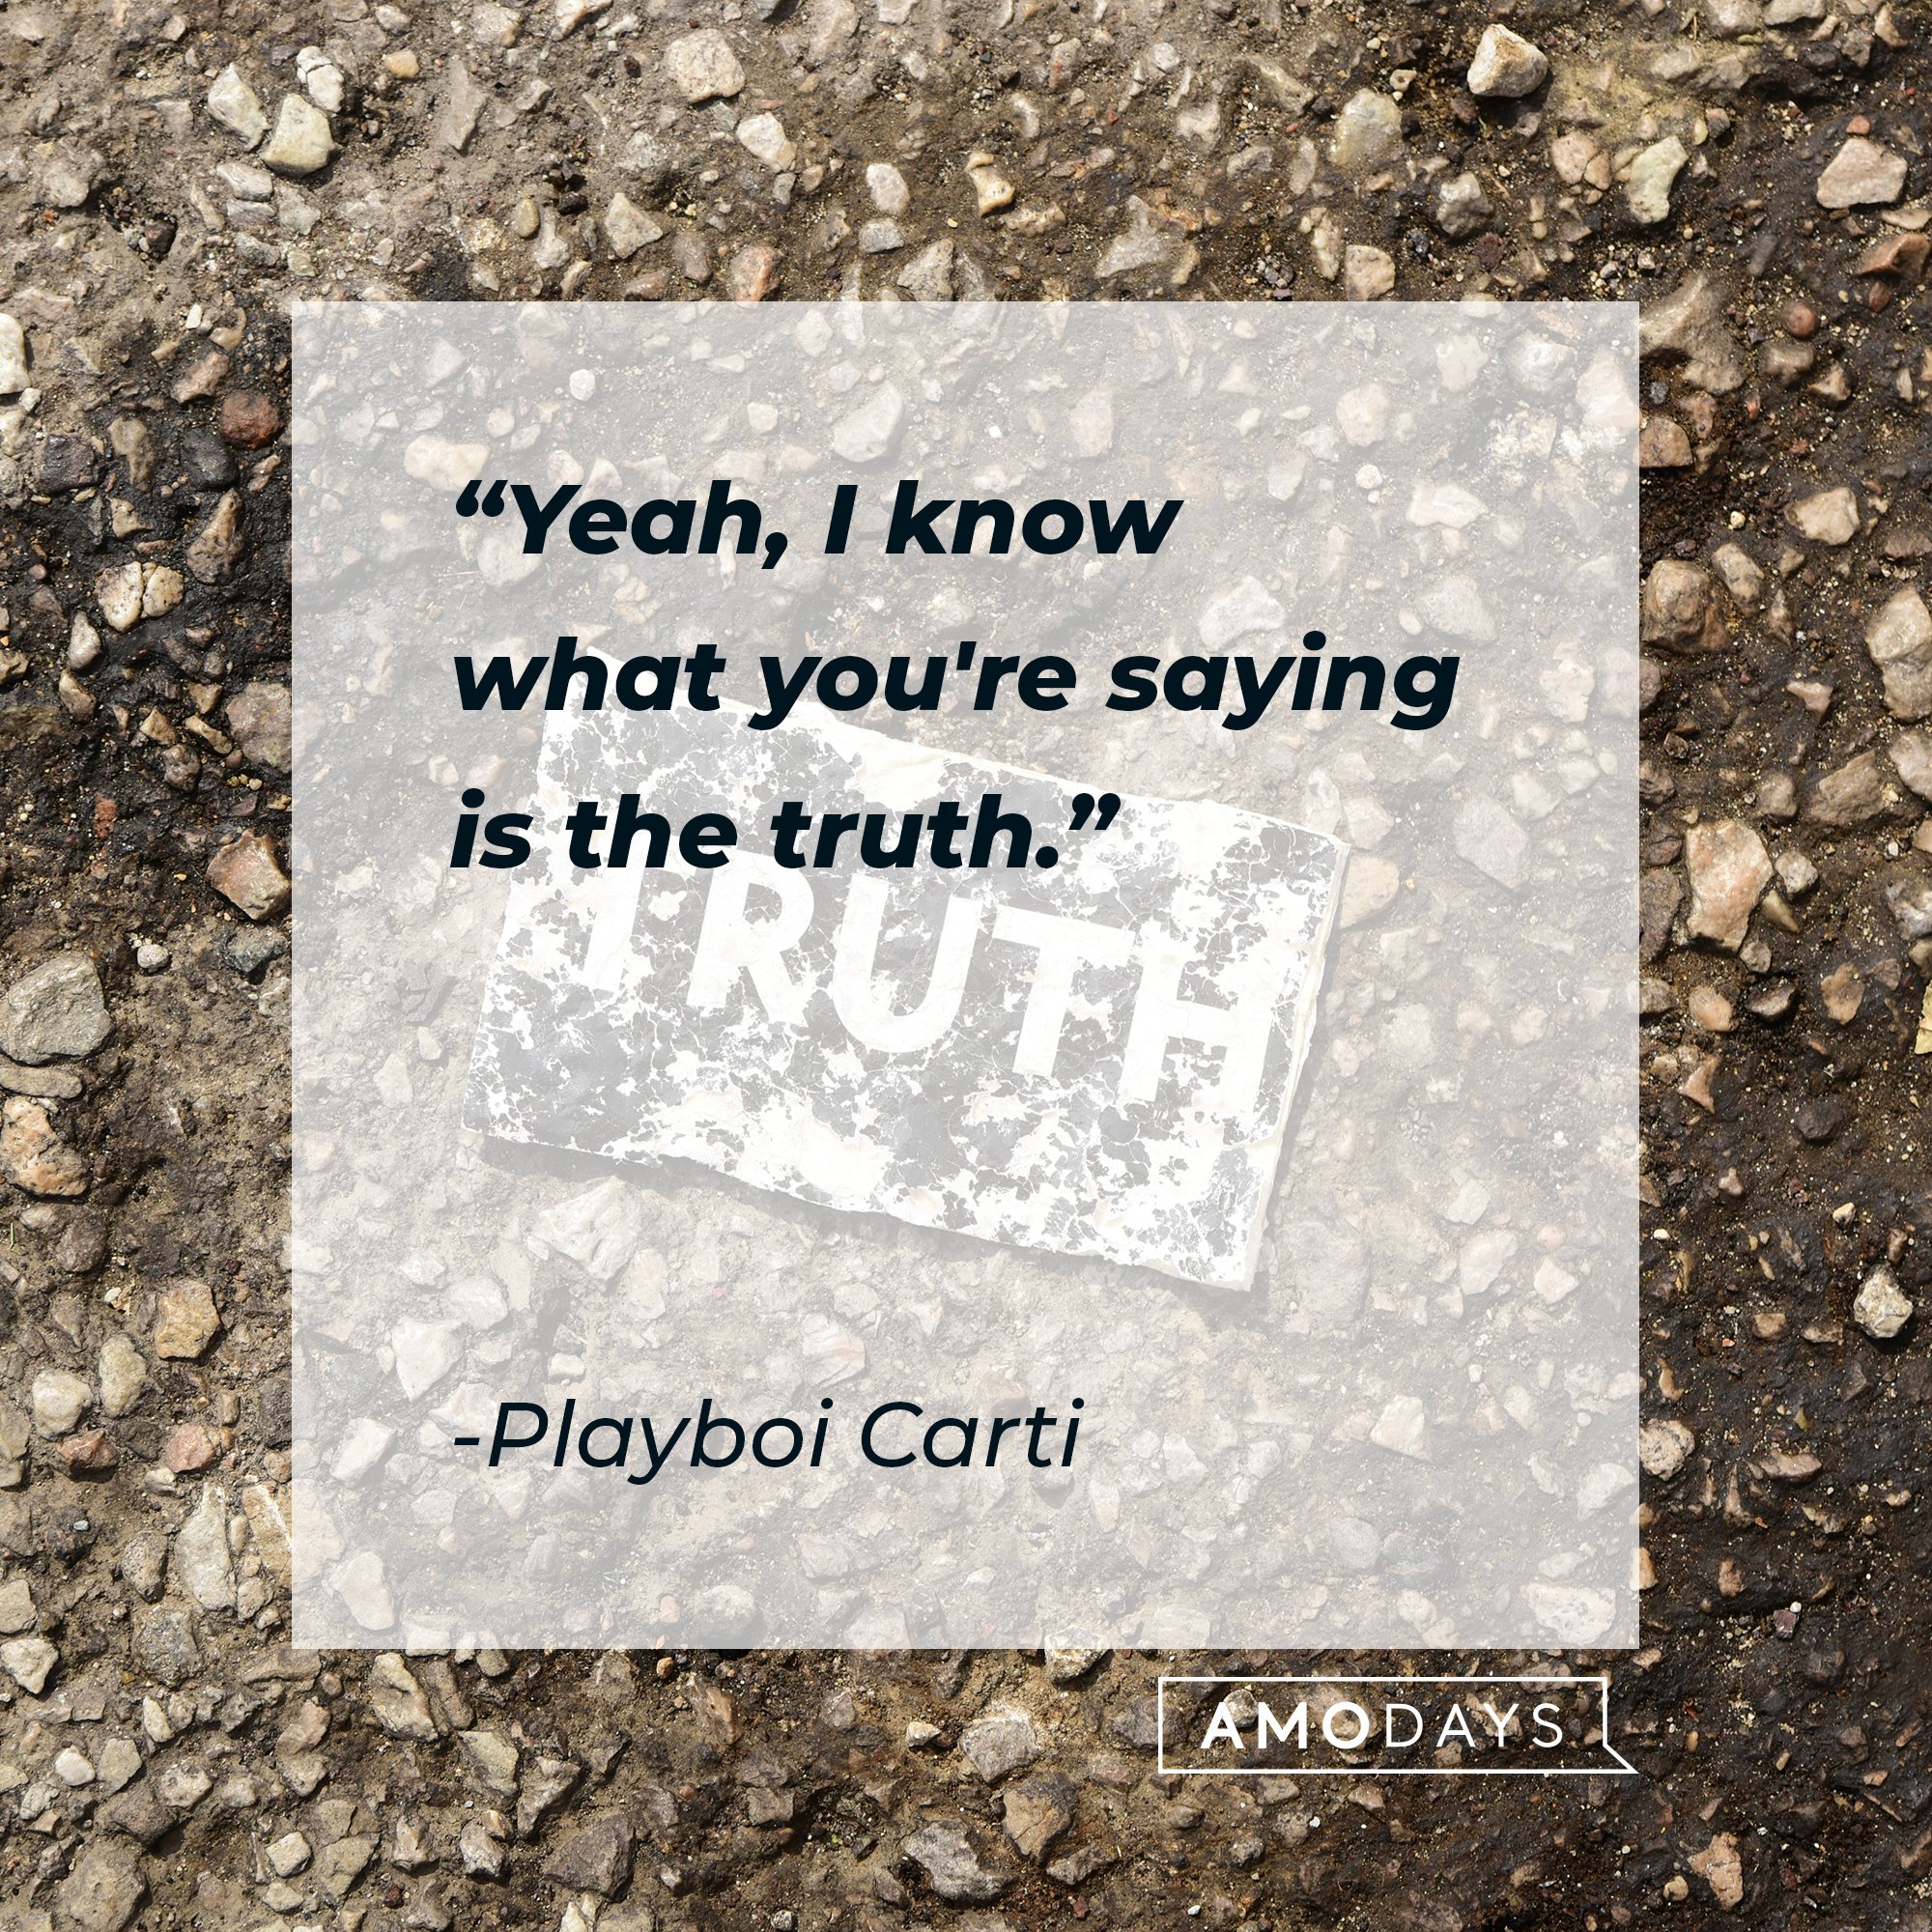 Playboi Carti ‘s quote: "Yeah, I know what you're saying is the truth." | Image: AmoDays